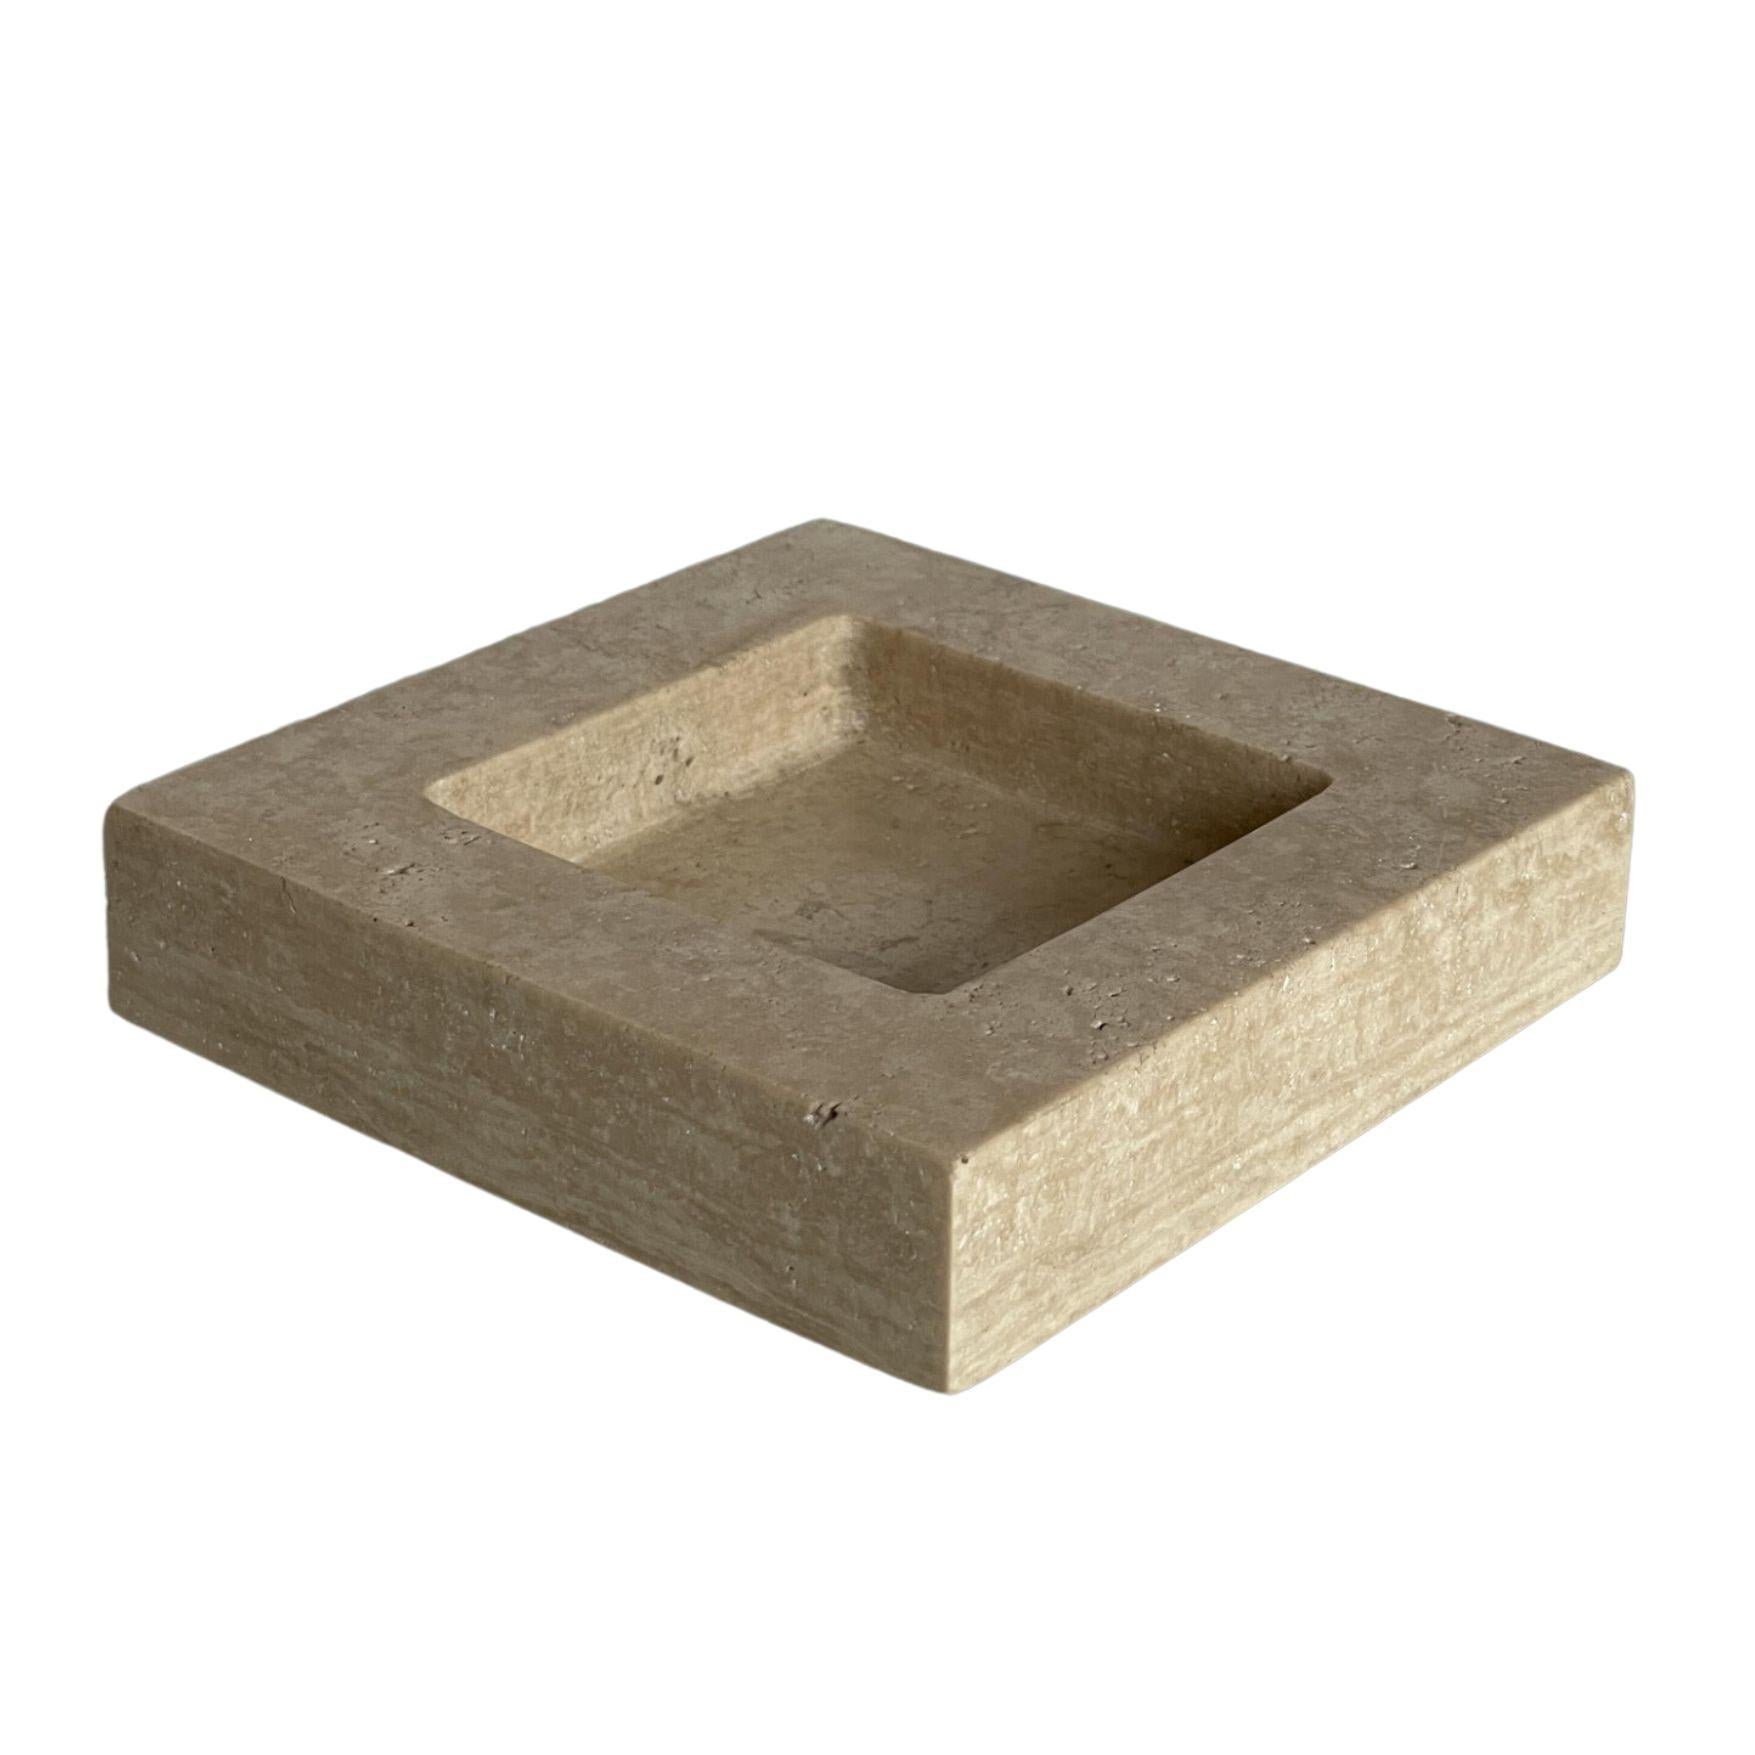 A limited production, functional object d'art exclusively produced by Anastasio Home.

The Teo is a chunky, five and half-inch square catchall cut from a single piece of solid marble or stone with perfectly imperfect lines, hand-finished by